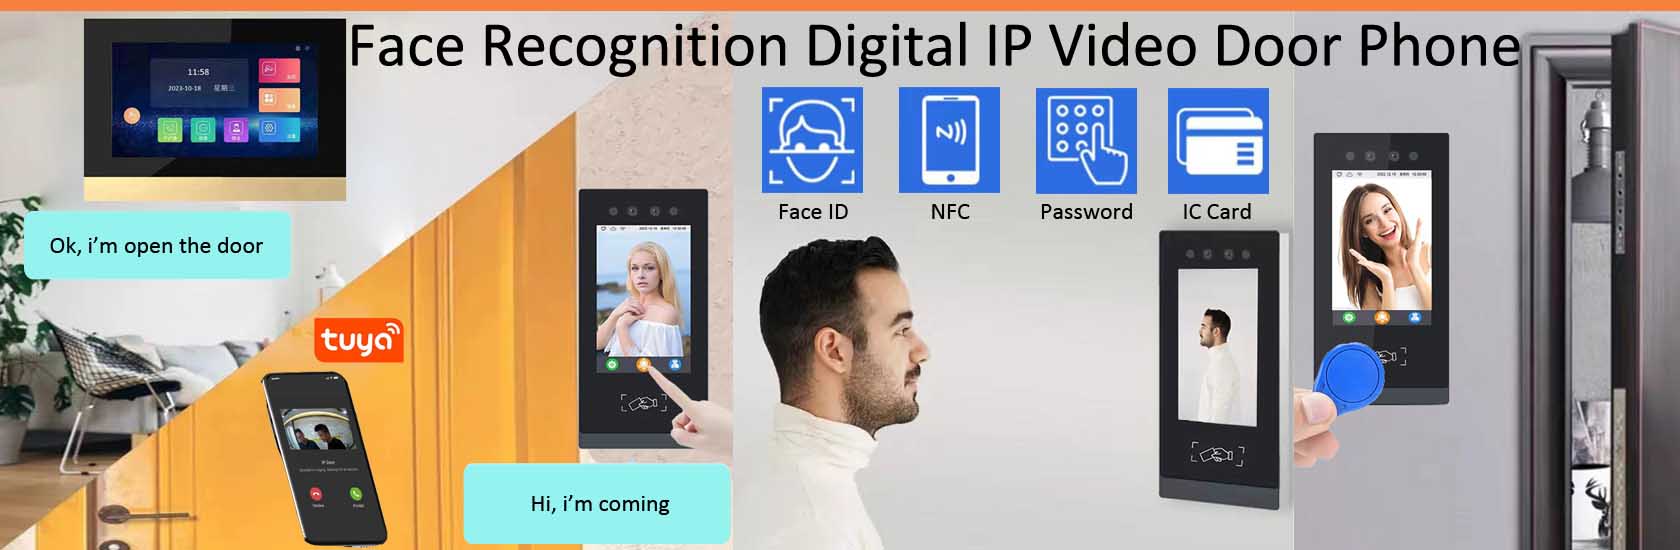 Face Recognition Video Door Phone  VF-DB10